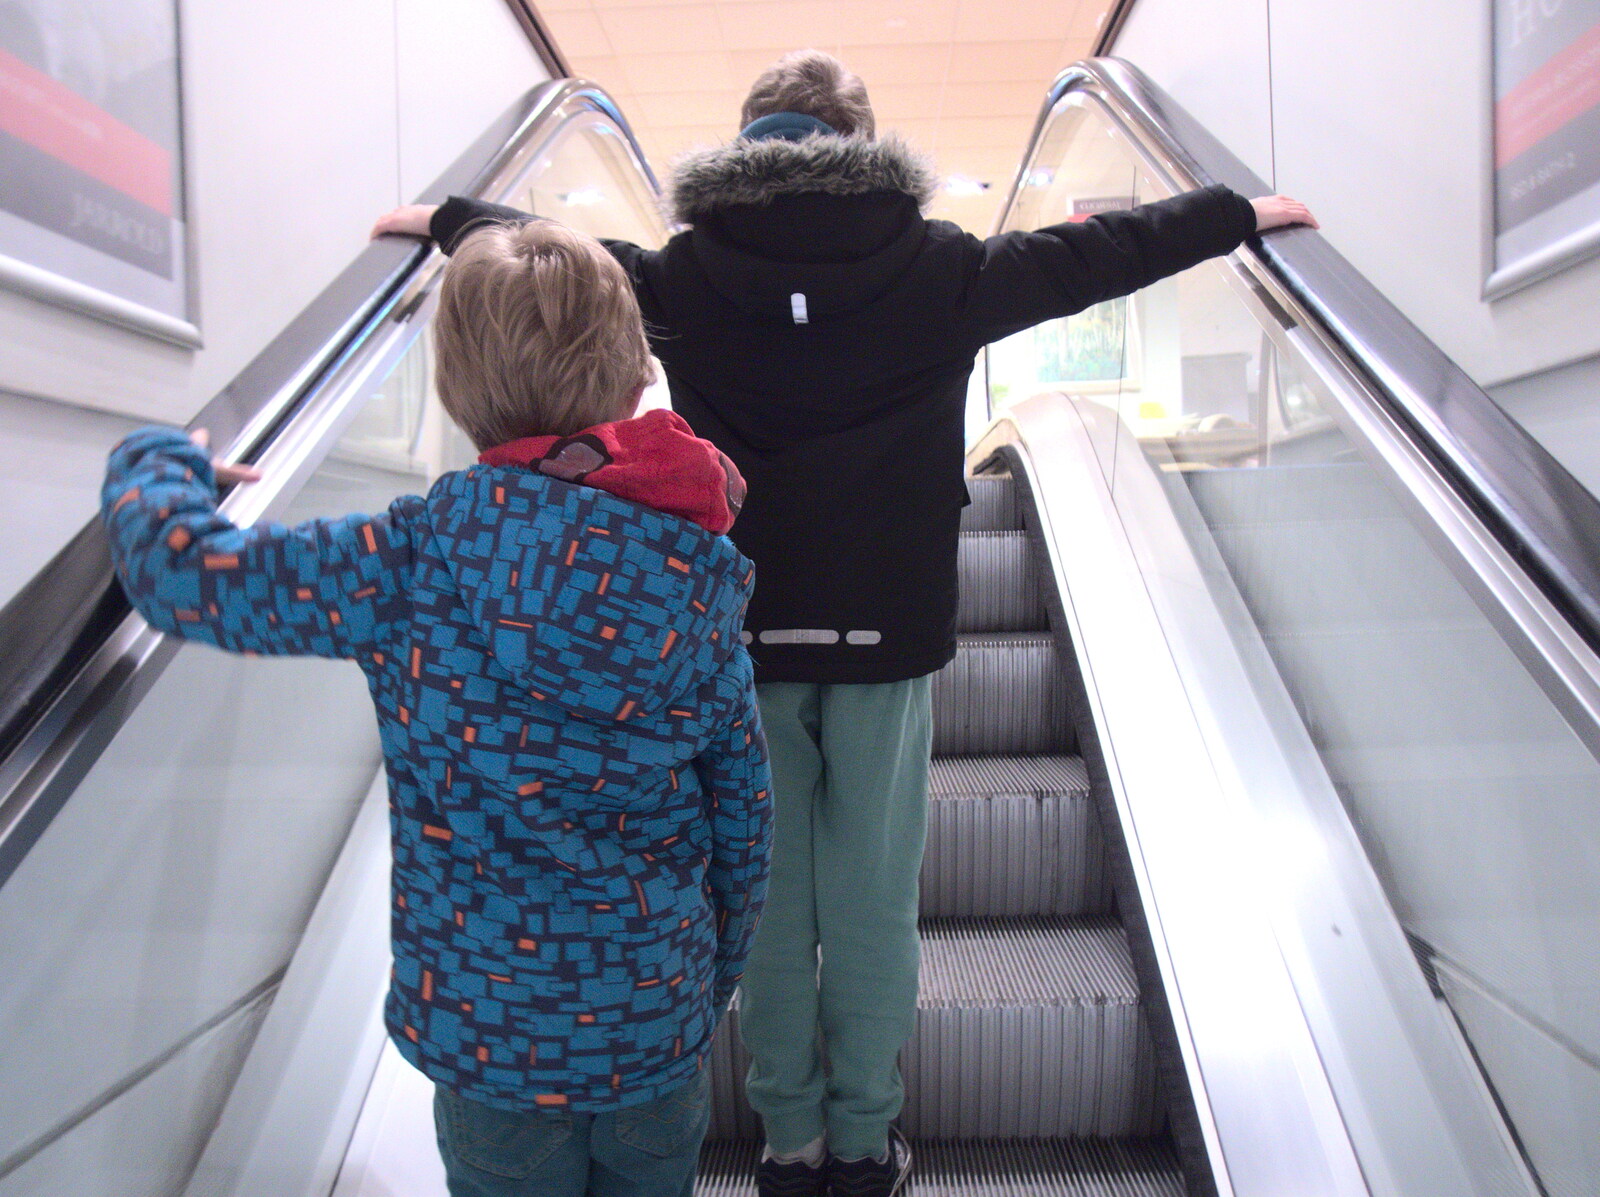 The boys on the escalator at Jarrolds in Norwich from A Couple of Trips to Norwich, Norfolk - 31st March 2018